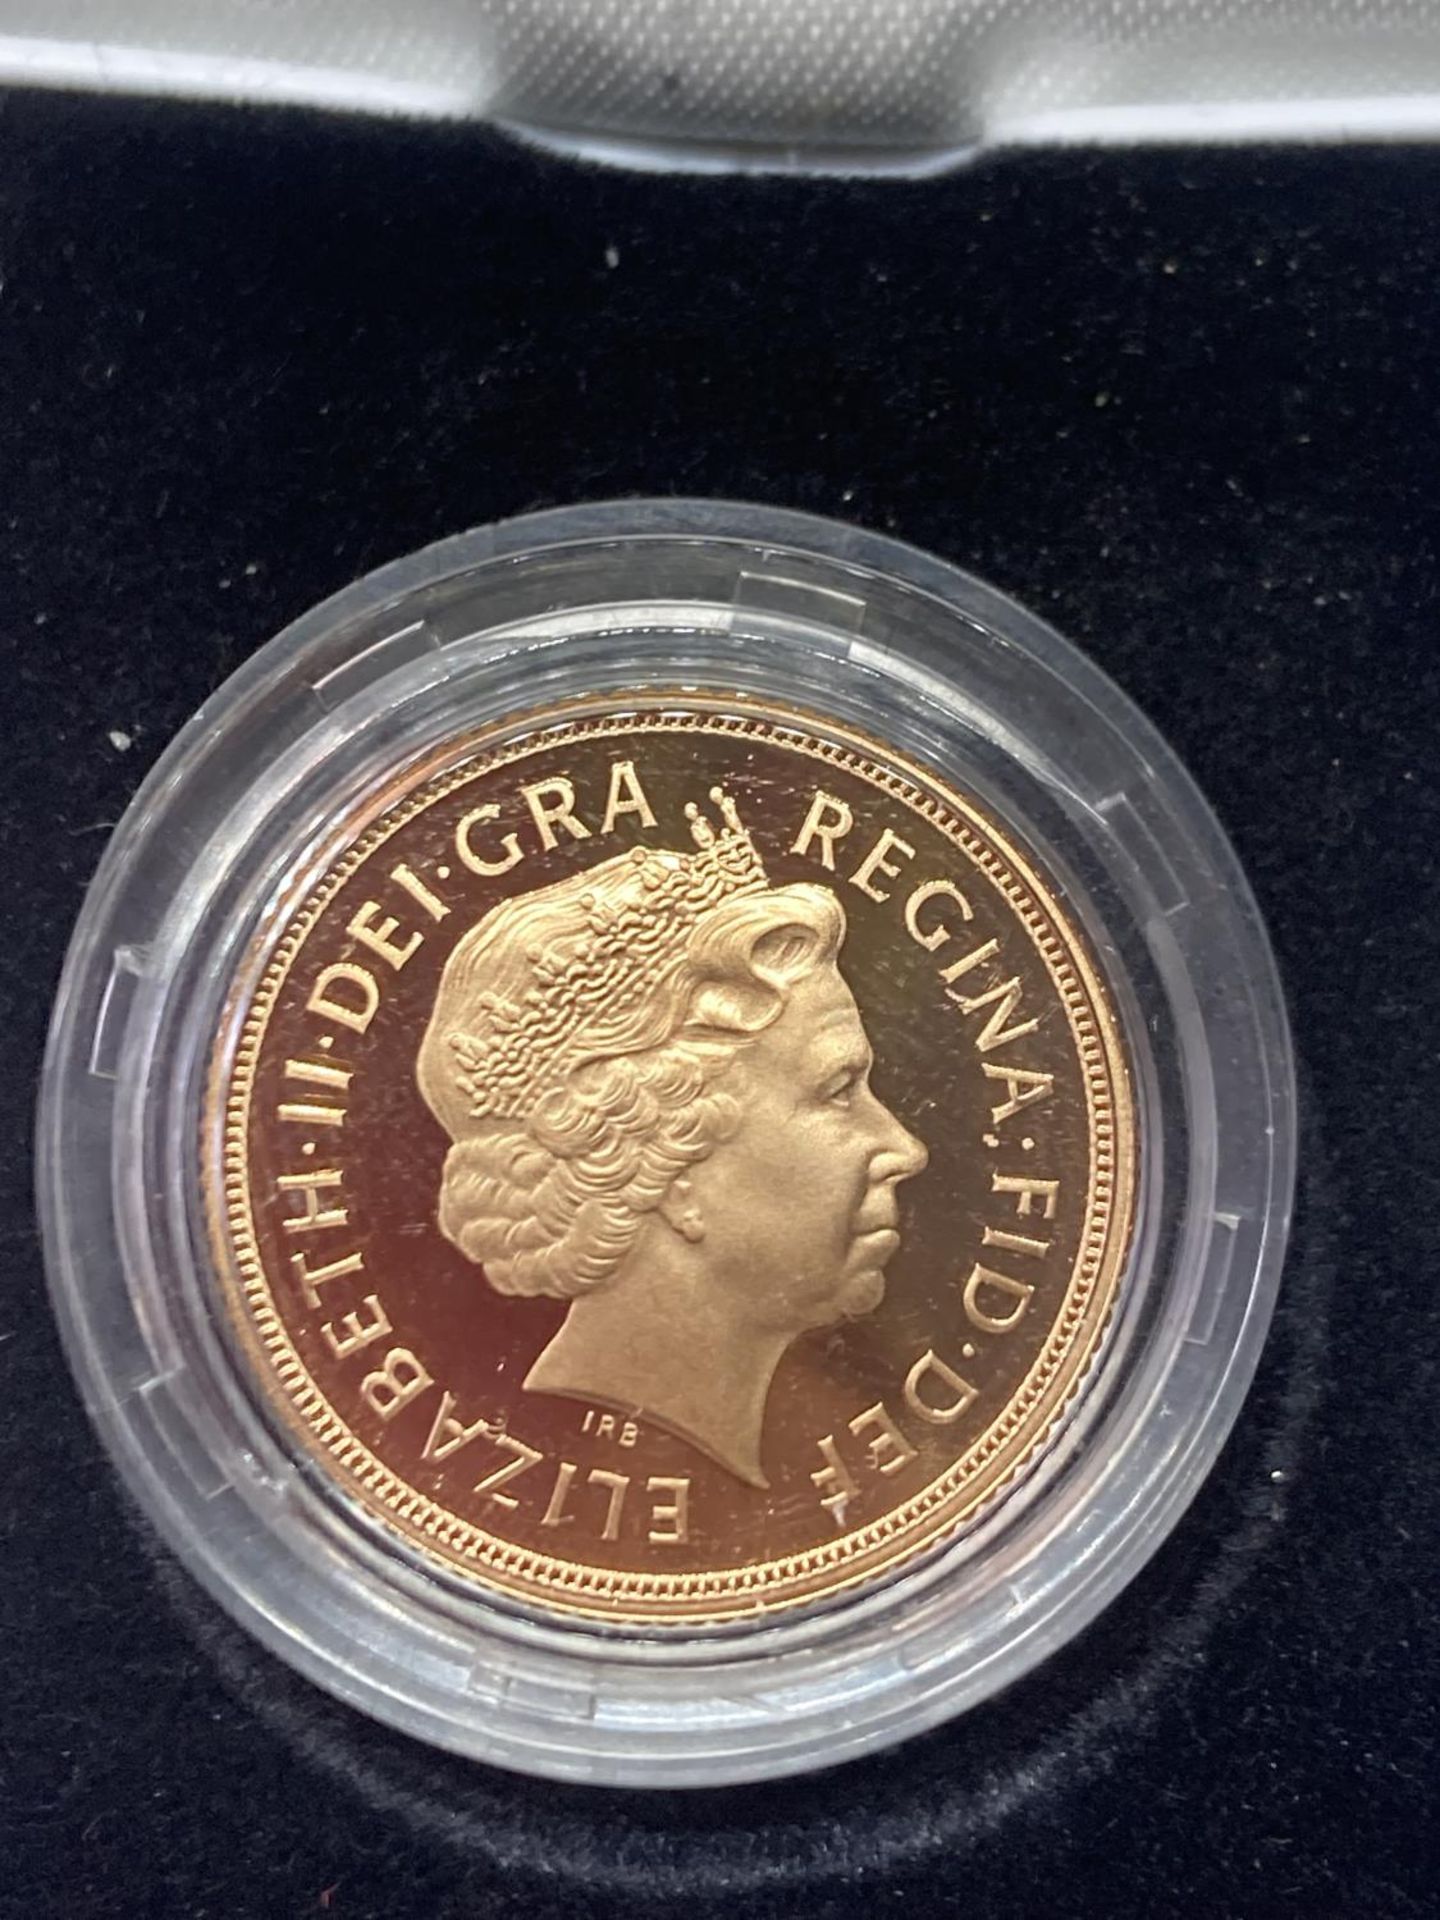 A 2003 GOLD PROOF SOVEREIGN QUEEN ELIZABETH II NO 09985 OF 15,000 IN A PRESENTATION BOX WITH - Bild 3 aus 5